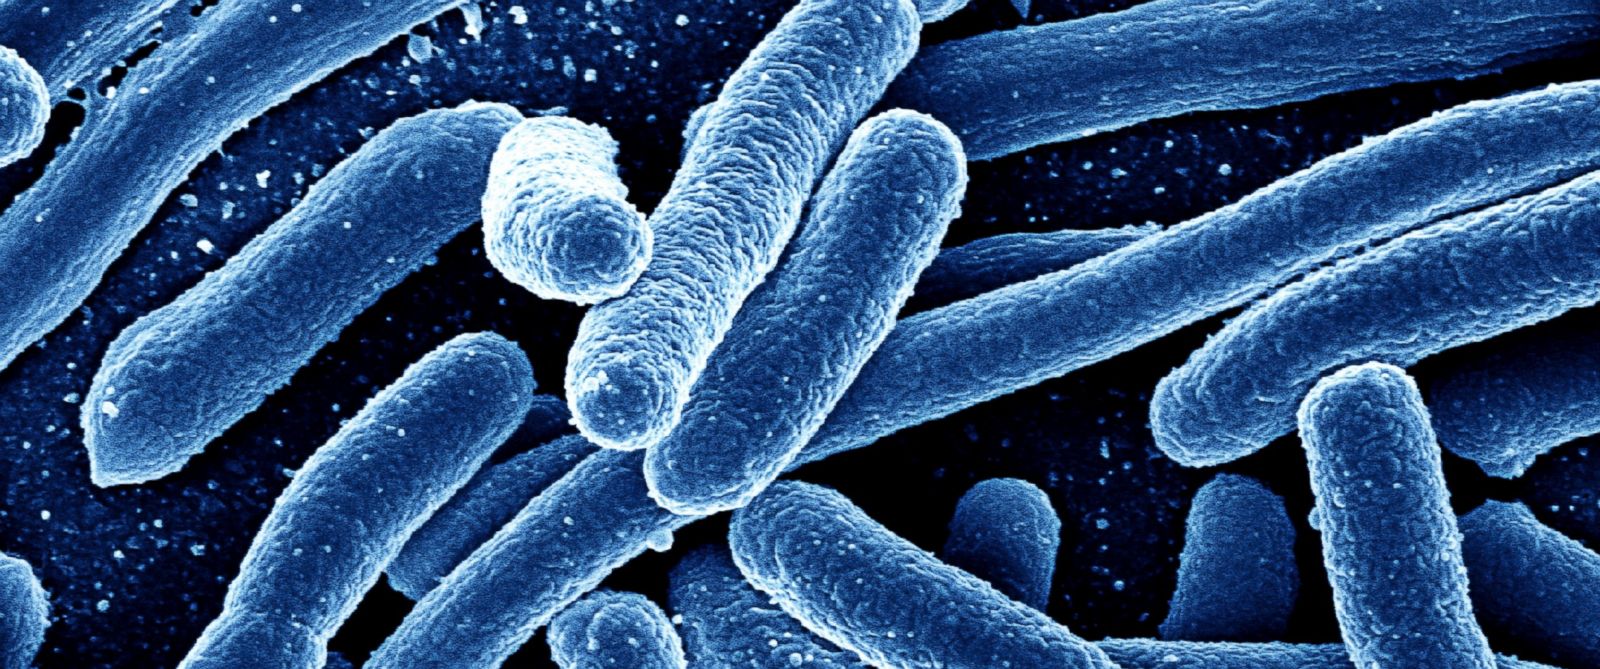 Image: Superbug bacteria found to DEVOUR rivals, then assimilate their genetic code to become RESISTANT to all known antibiotics